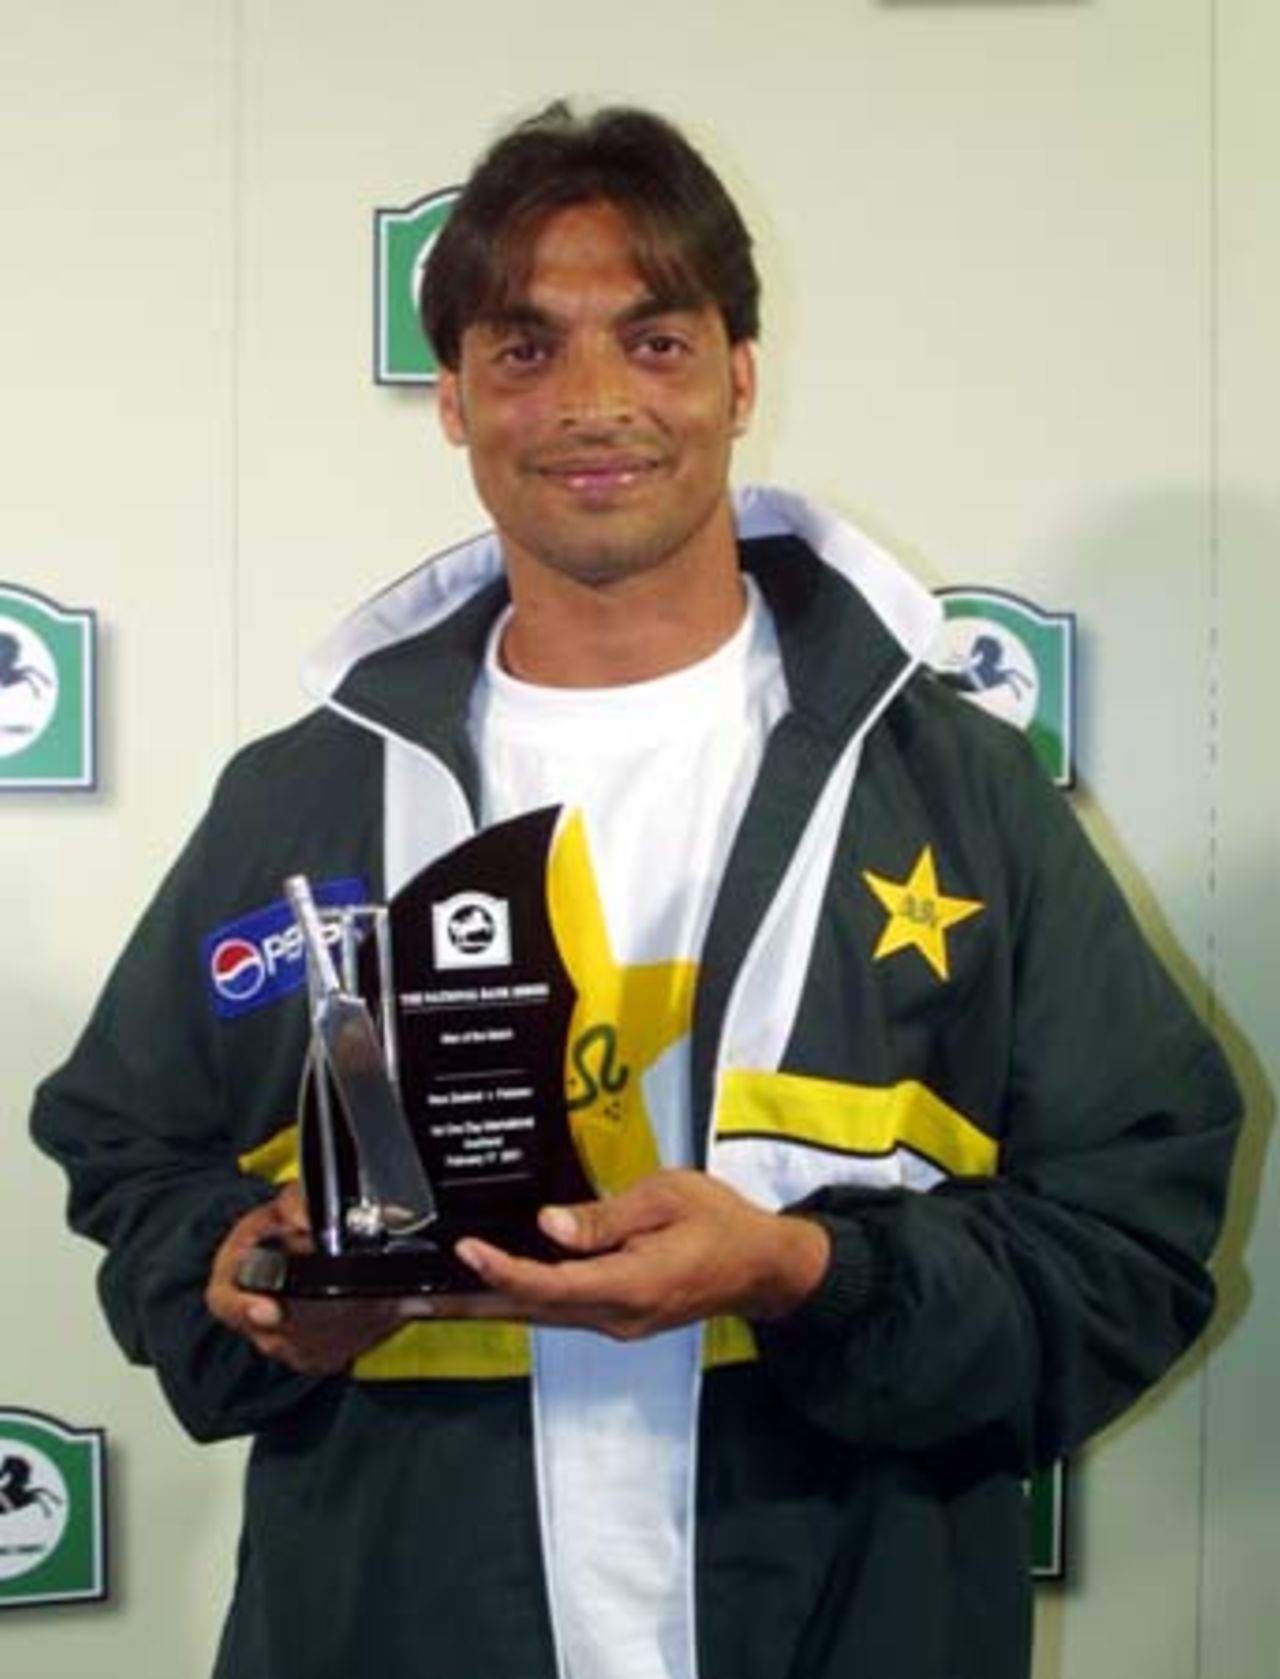 Pakistan fast bowler Shoaib Akhtar holds the National Bank Player of the Match trophy for taking 5-19 from 6.3 overs, his first five-wicket bag in One-Day Internationals. 1st One-Day International: New Zealand v Pakistan at Eden Park, Auckland, 18 February 2001.